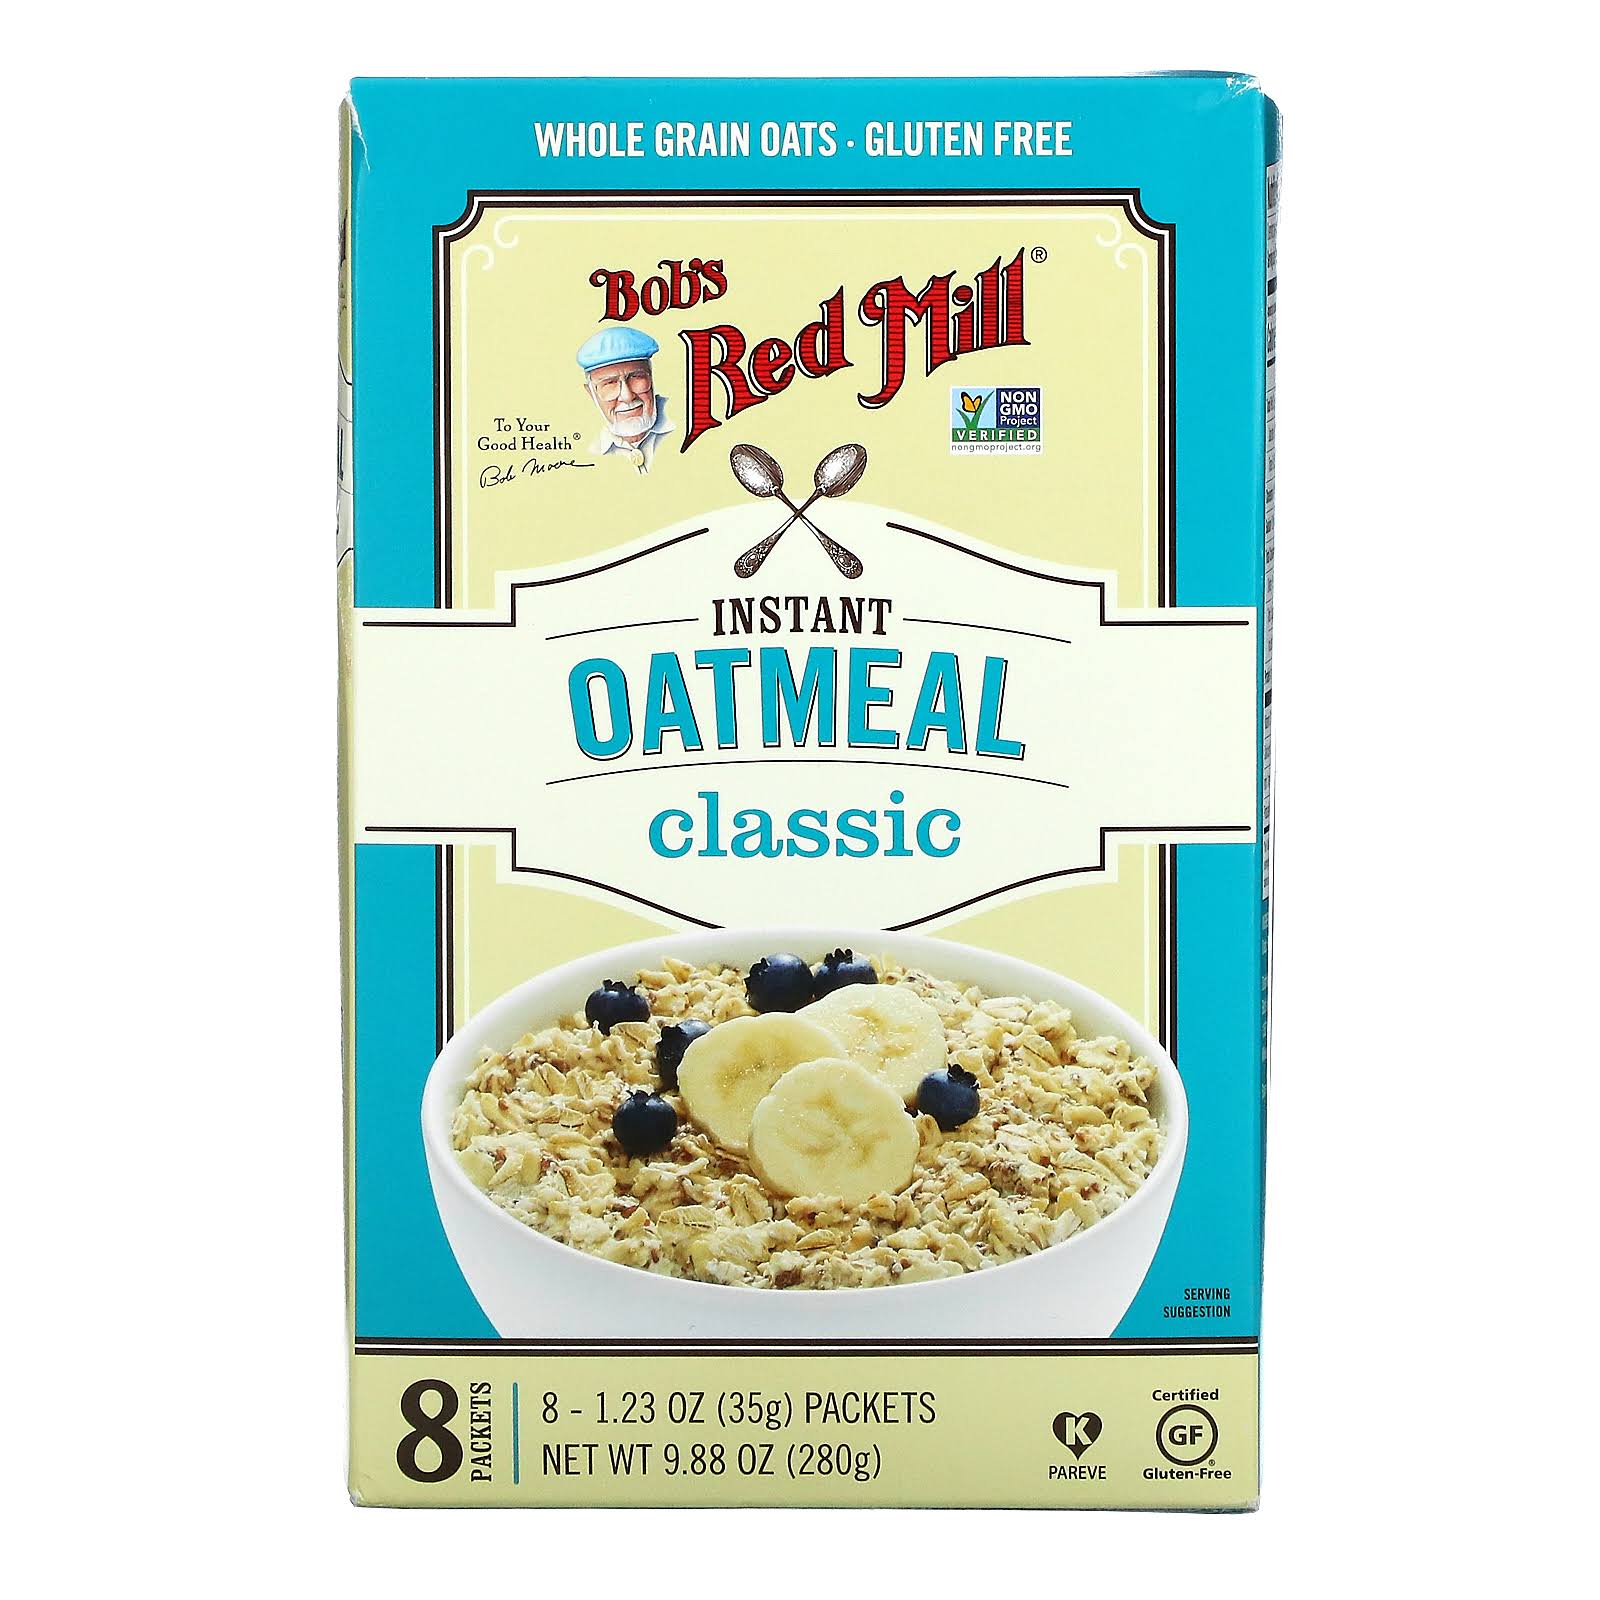 Bob's red mill classic instant oatmeal, 9.88 oz